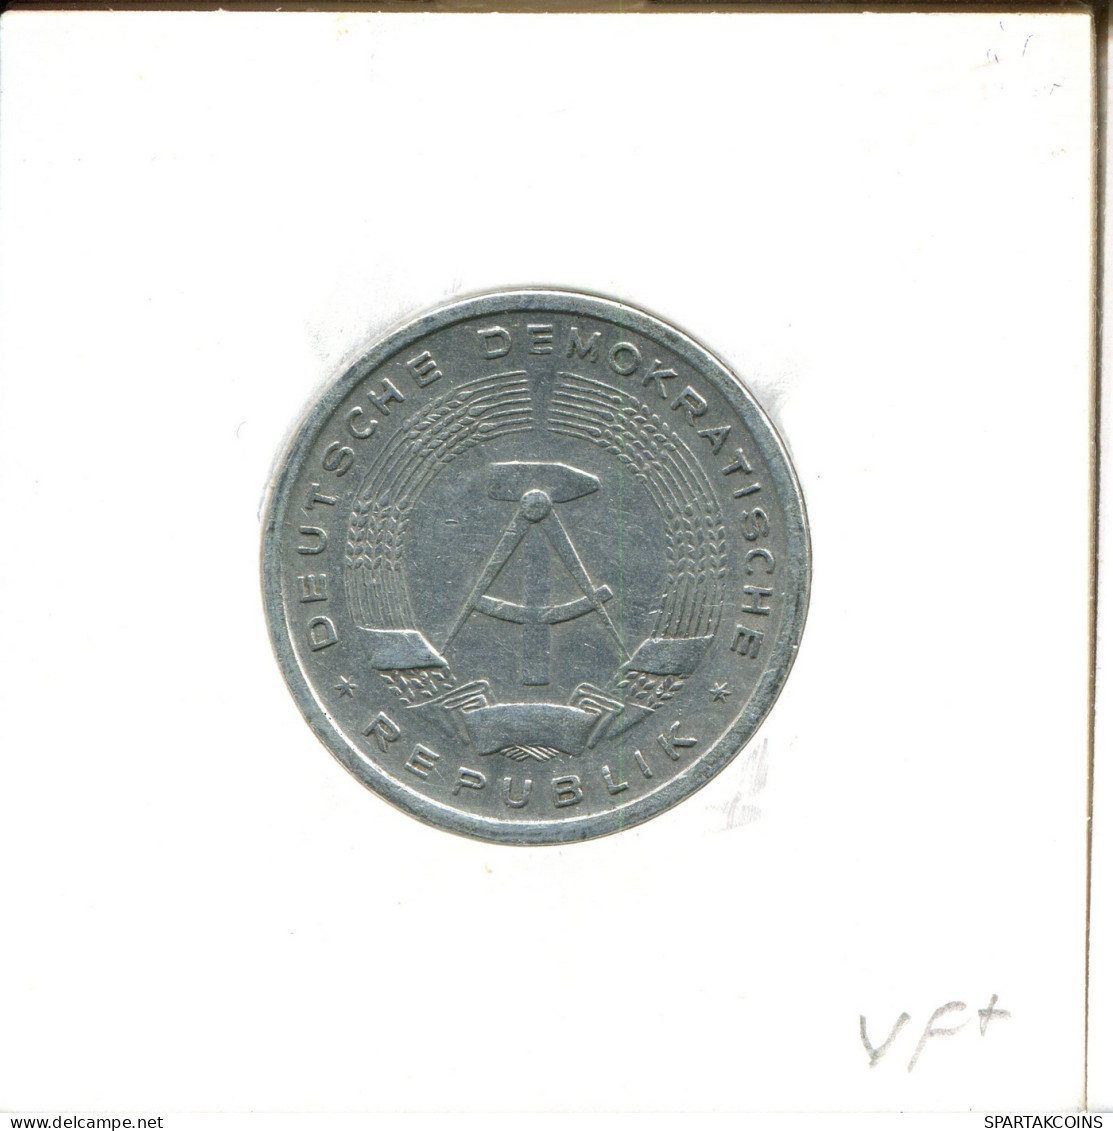 1 DM 1956 A DDR EAST ALLEMAGNE Pièce GERMANY #DB106.F.A - 1 Marco